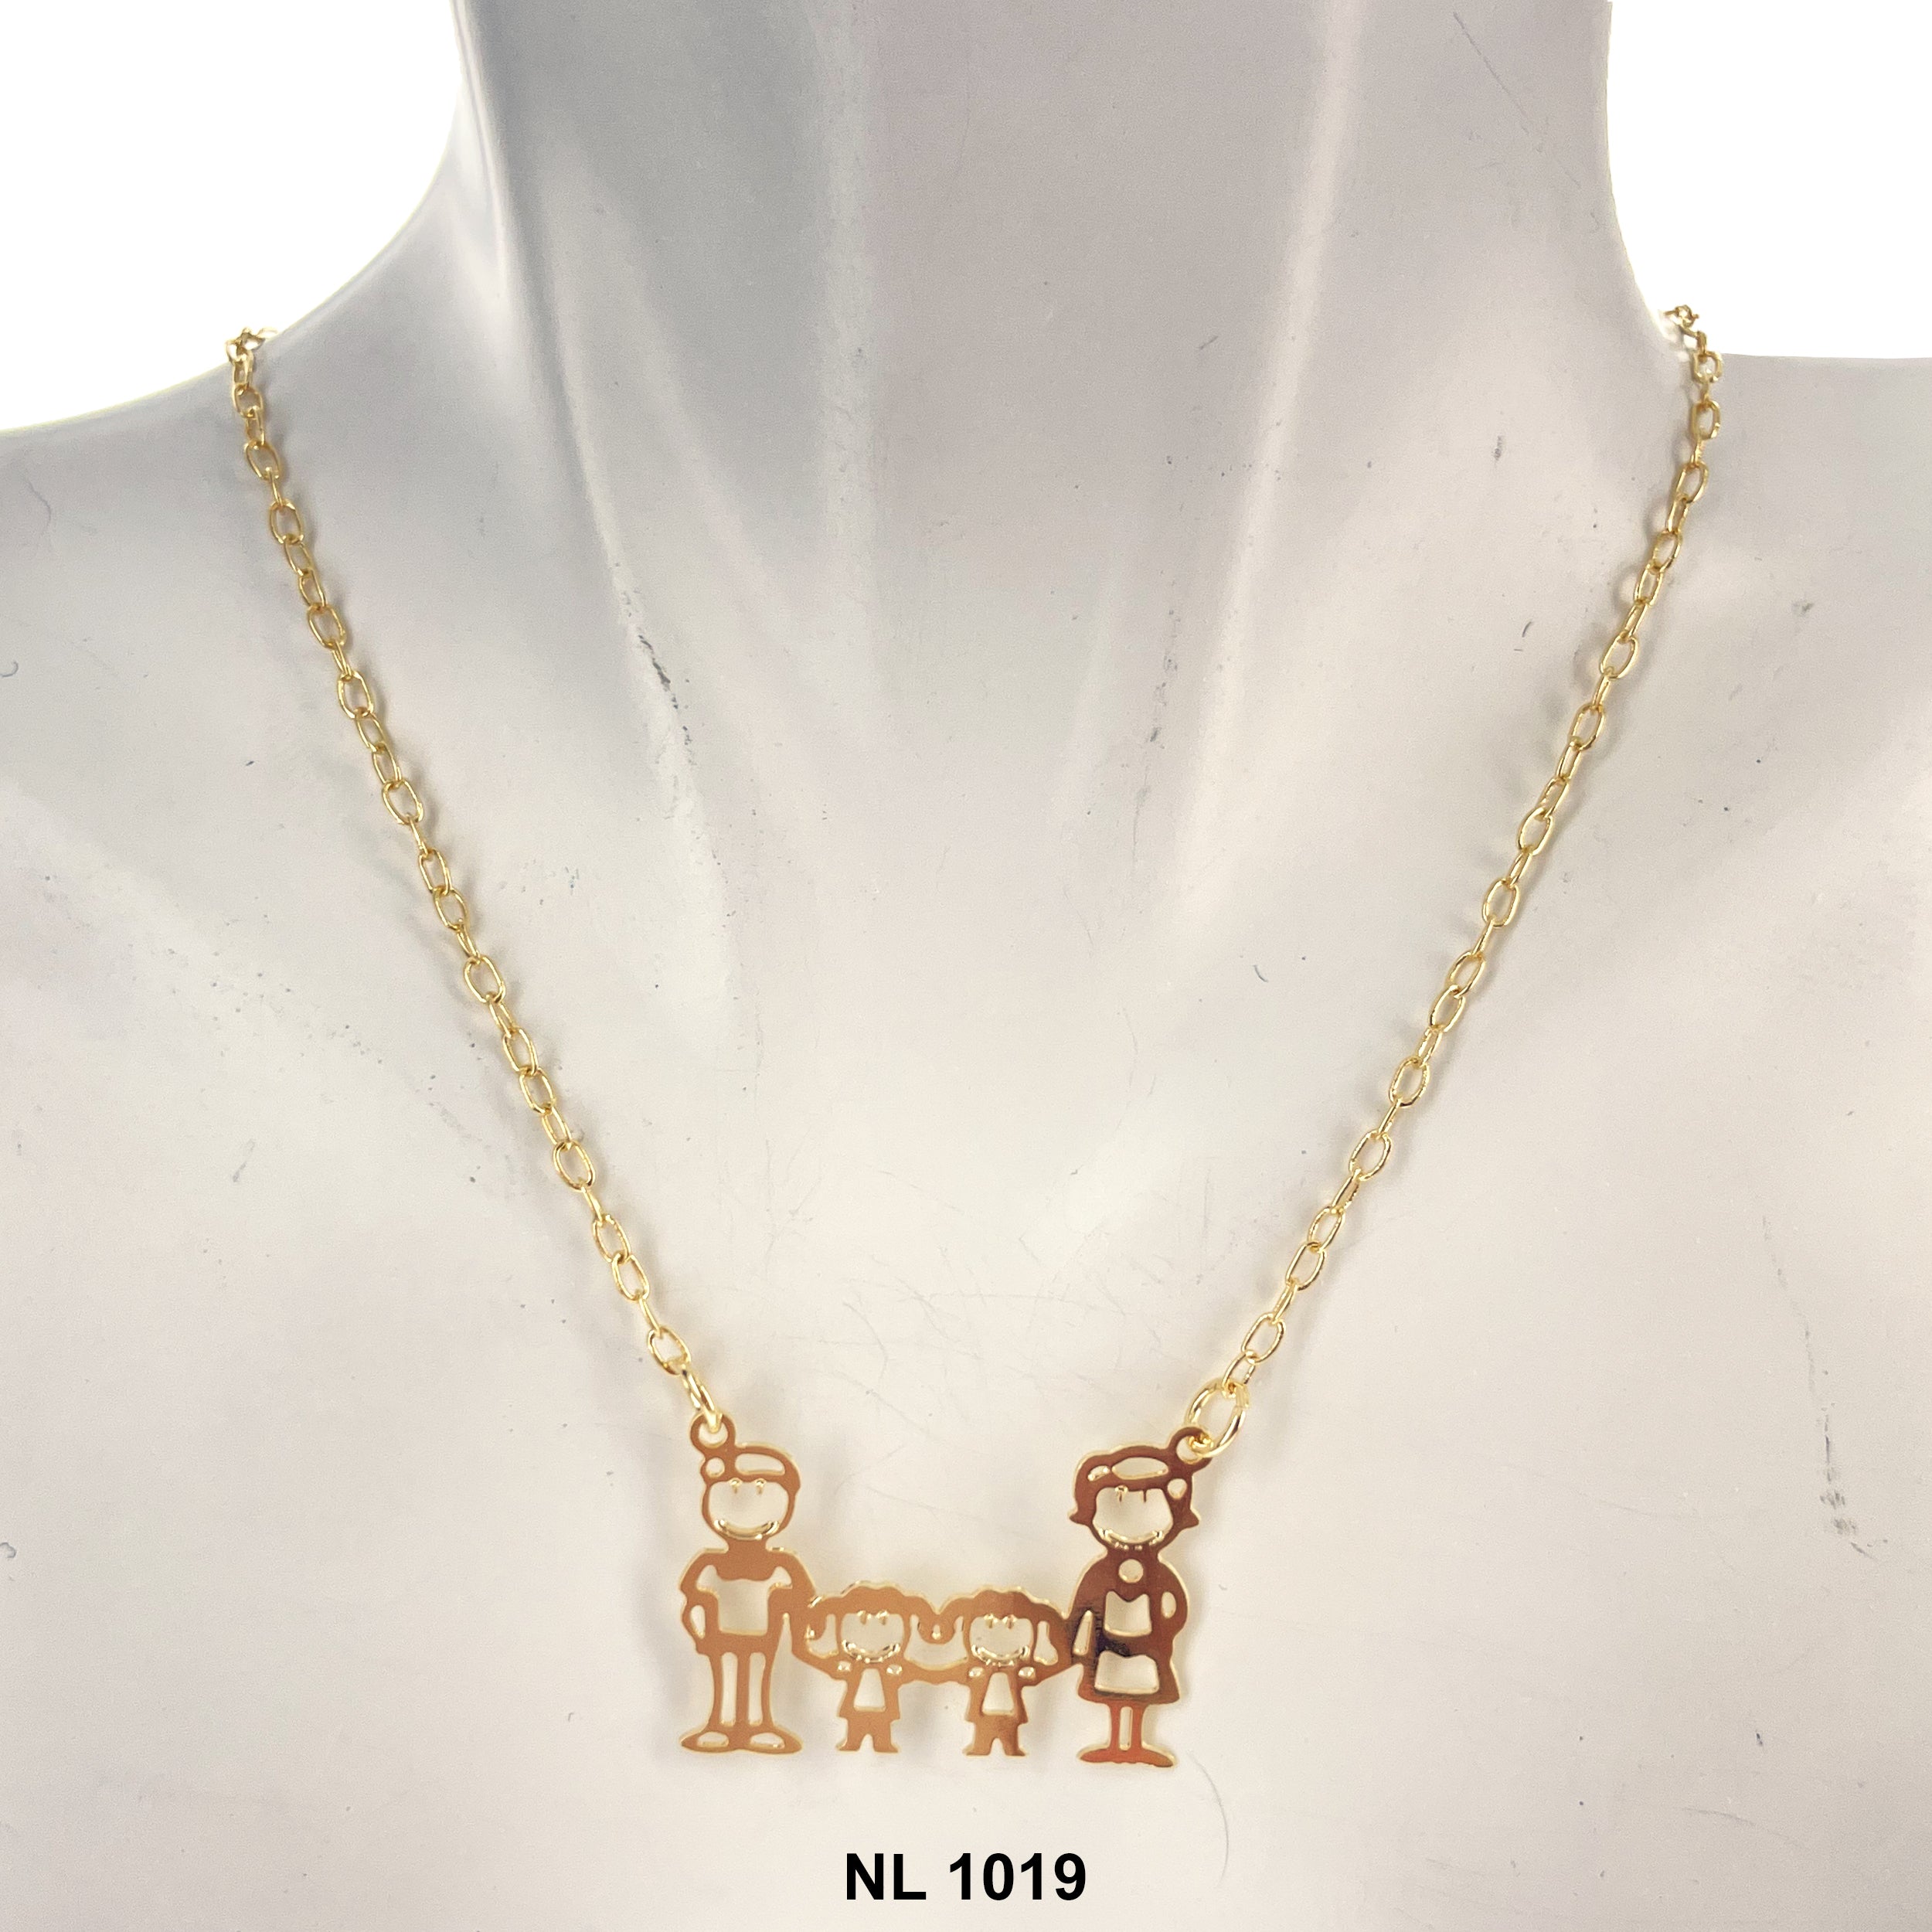 Family Necklace NL 1019